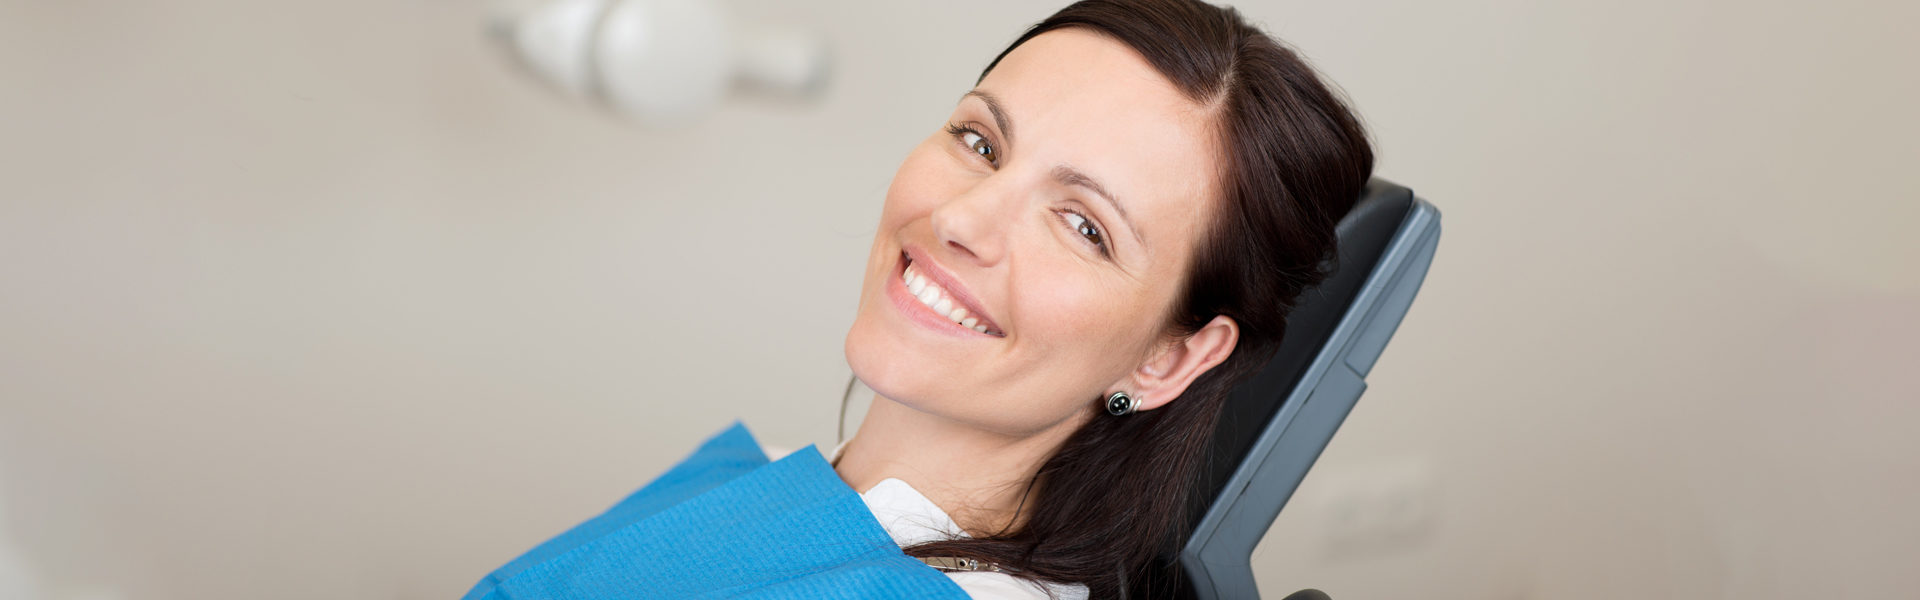 Endodontics (Root Canal Treatment) Therapy in St Petersburg, FL